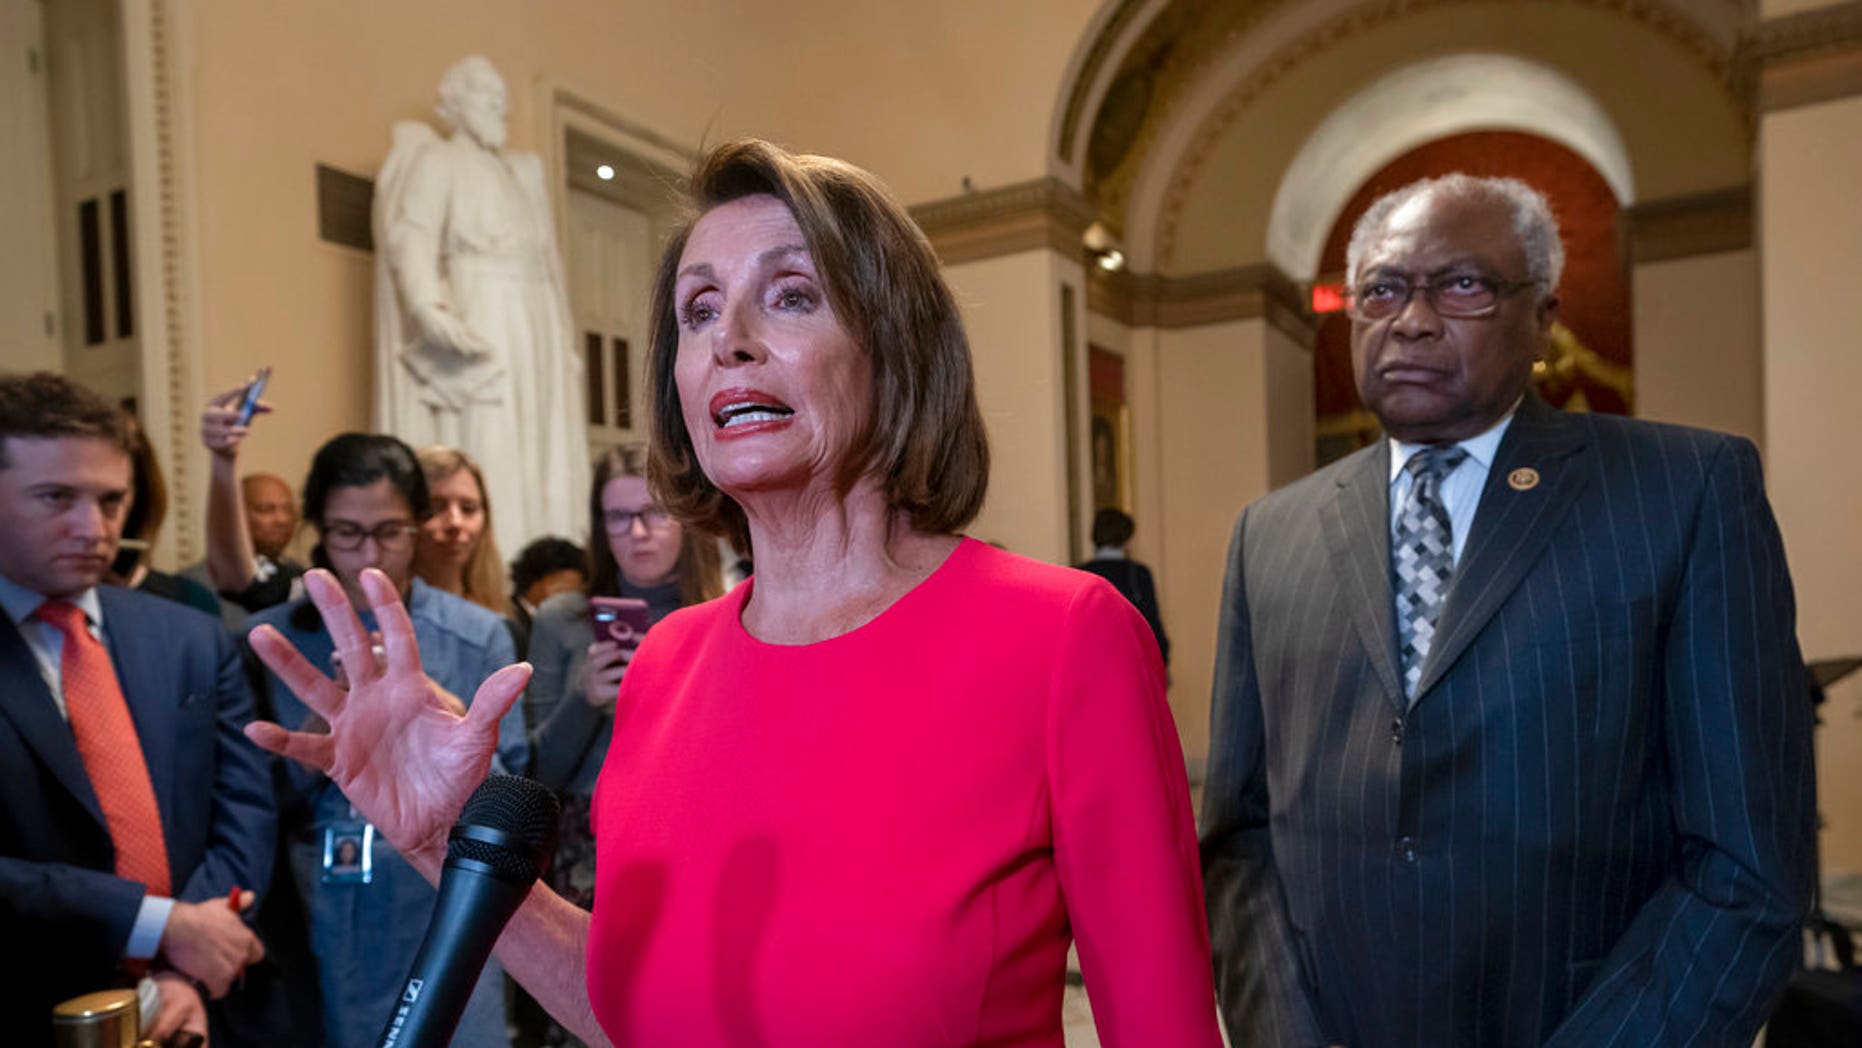 FOX NEWS FIRST: Shutdown talks to resume at White House; A warning for Pelosi and empowered Dems